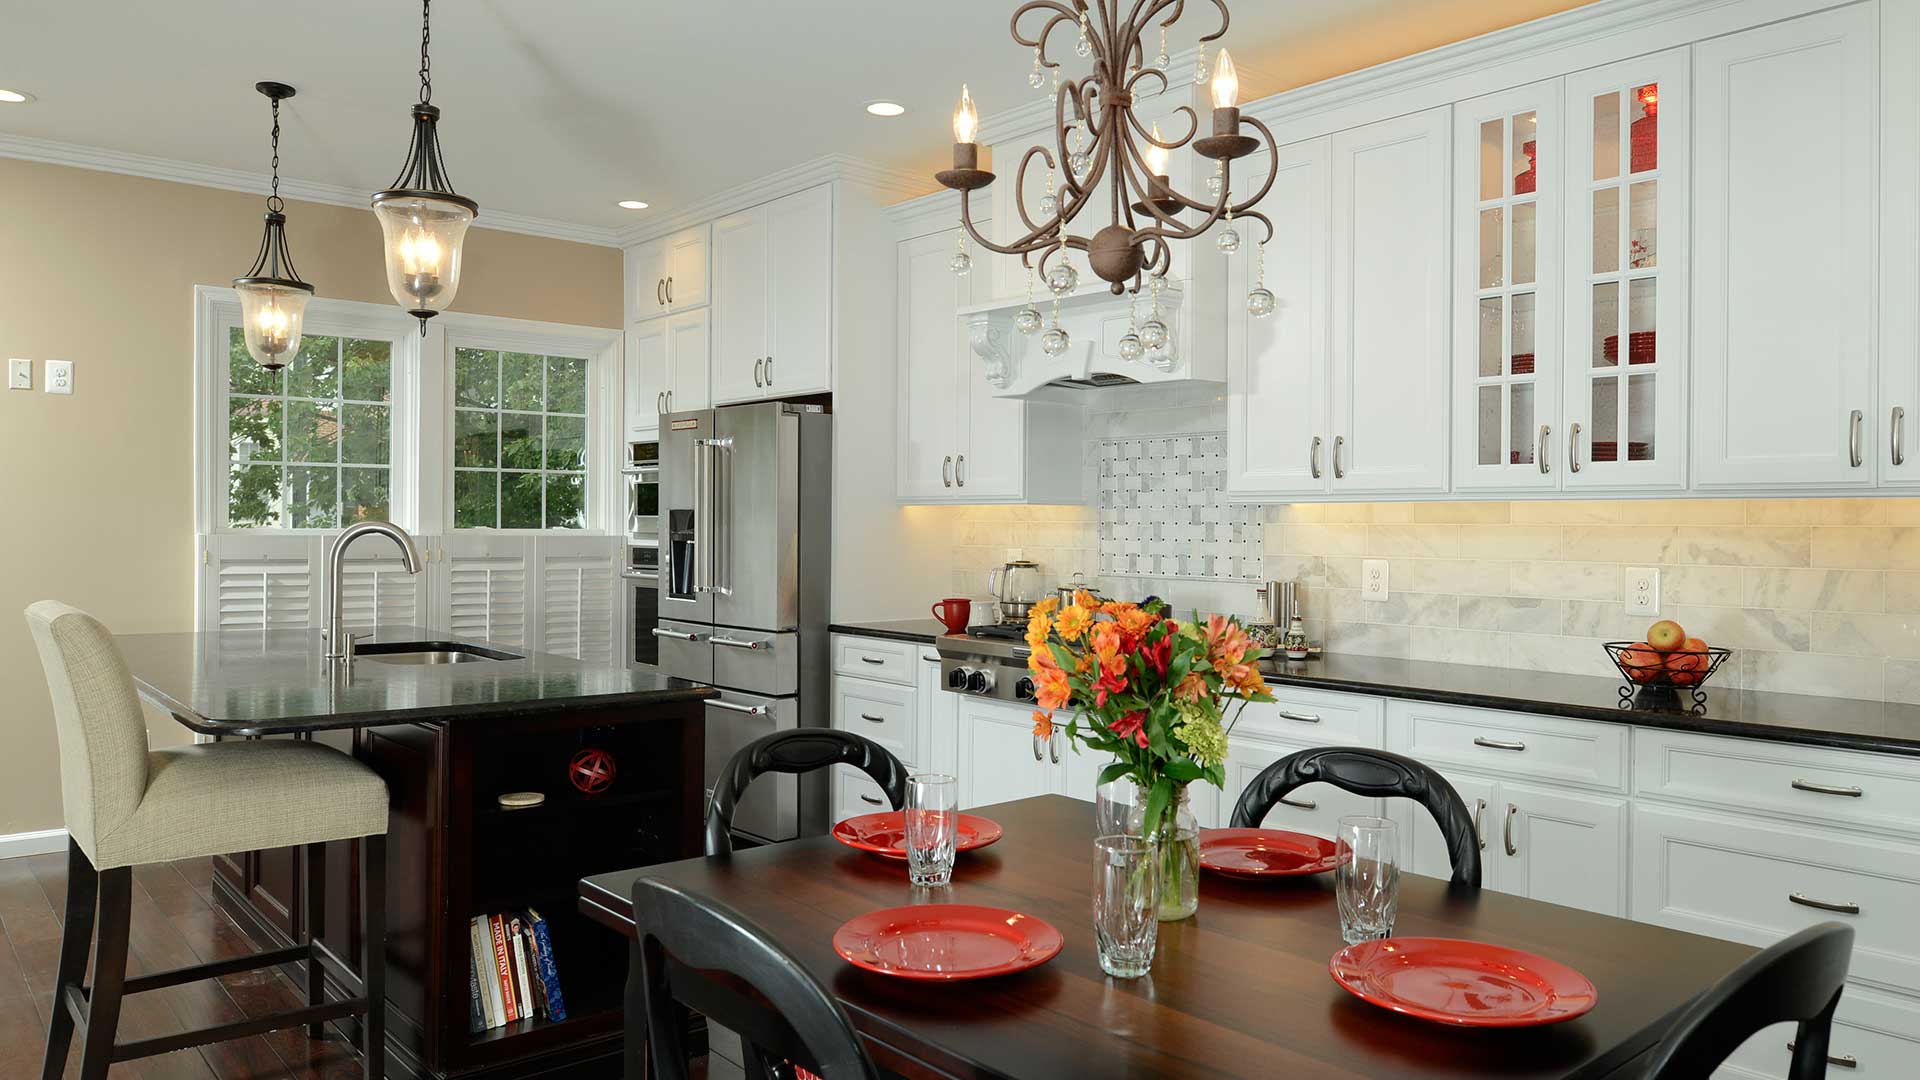 2016 NARI Capital CotY Honorable Mention Award Winner, Residential Kitchen $30,000 to $60,000